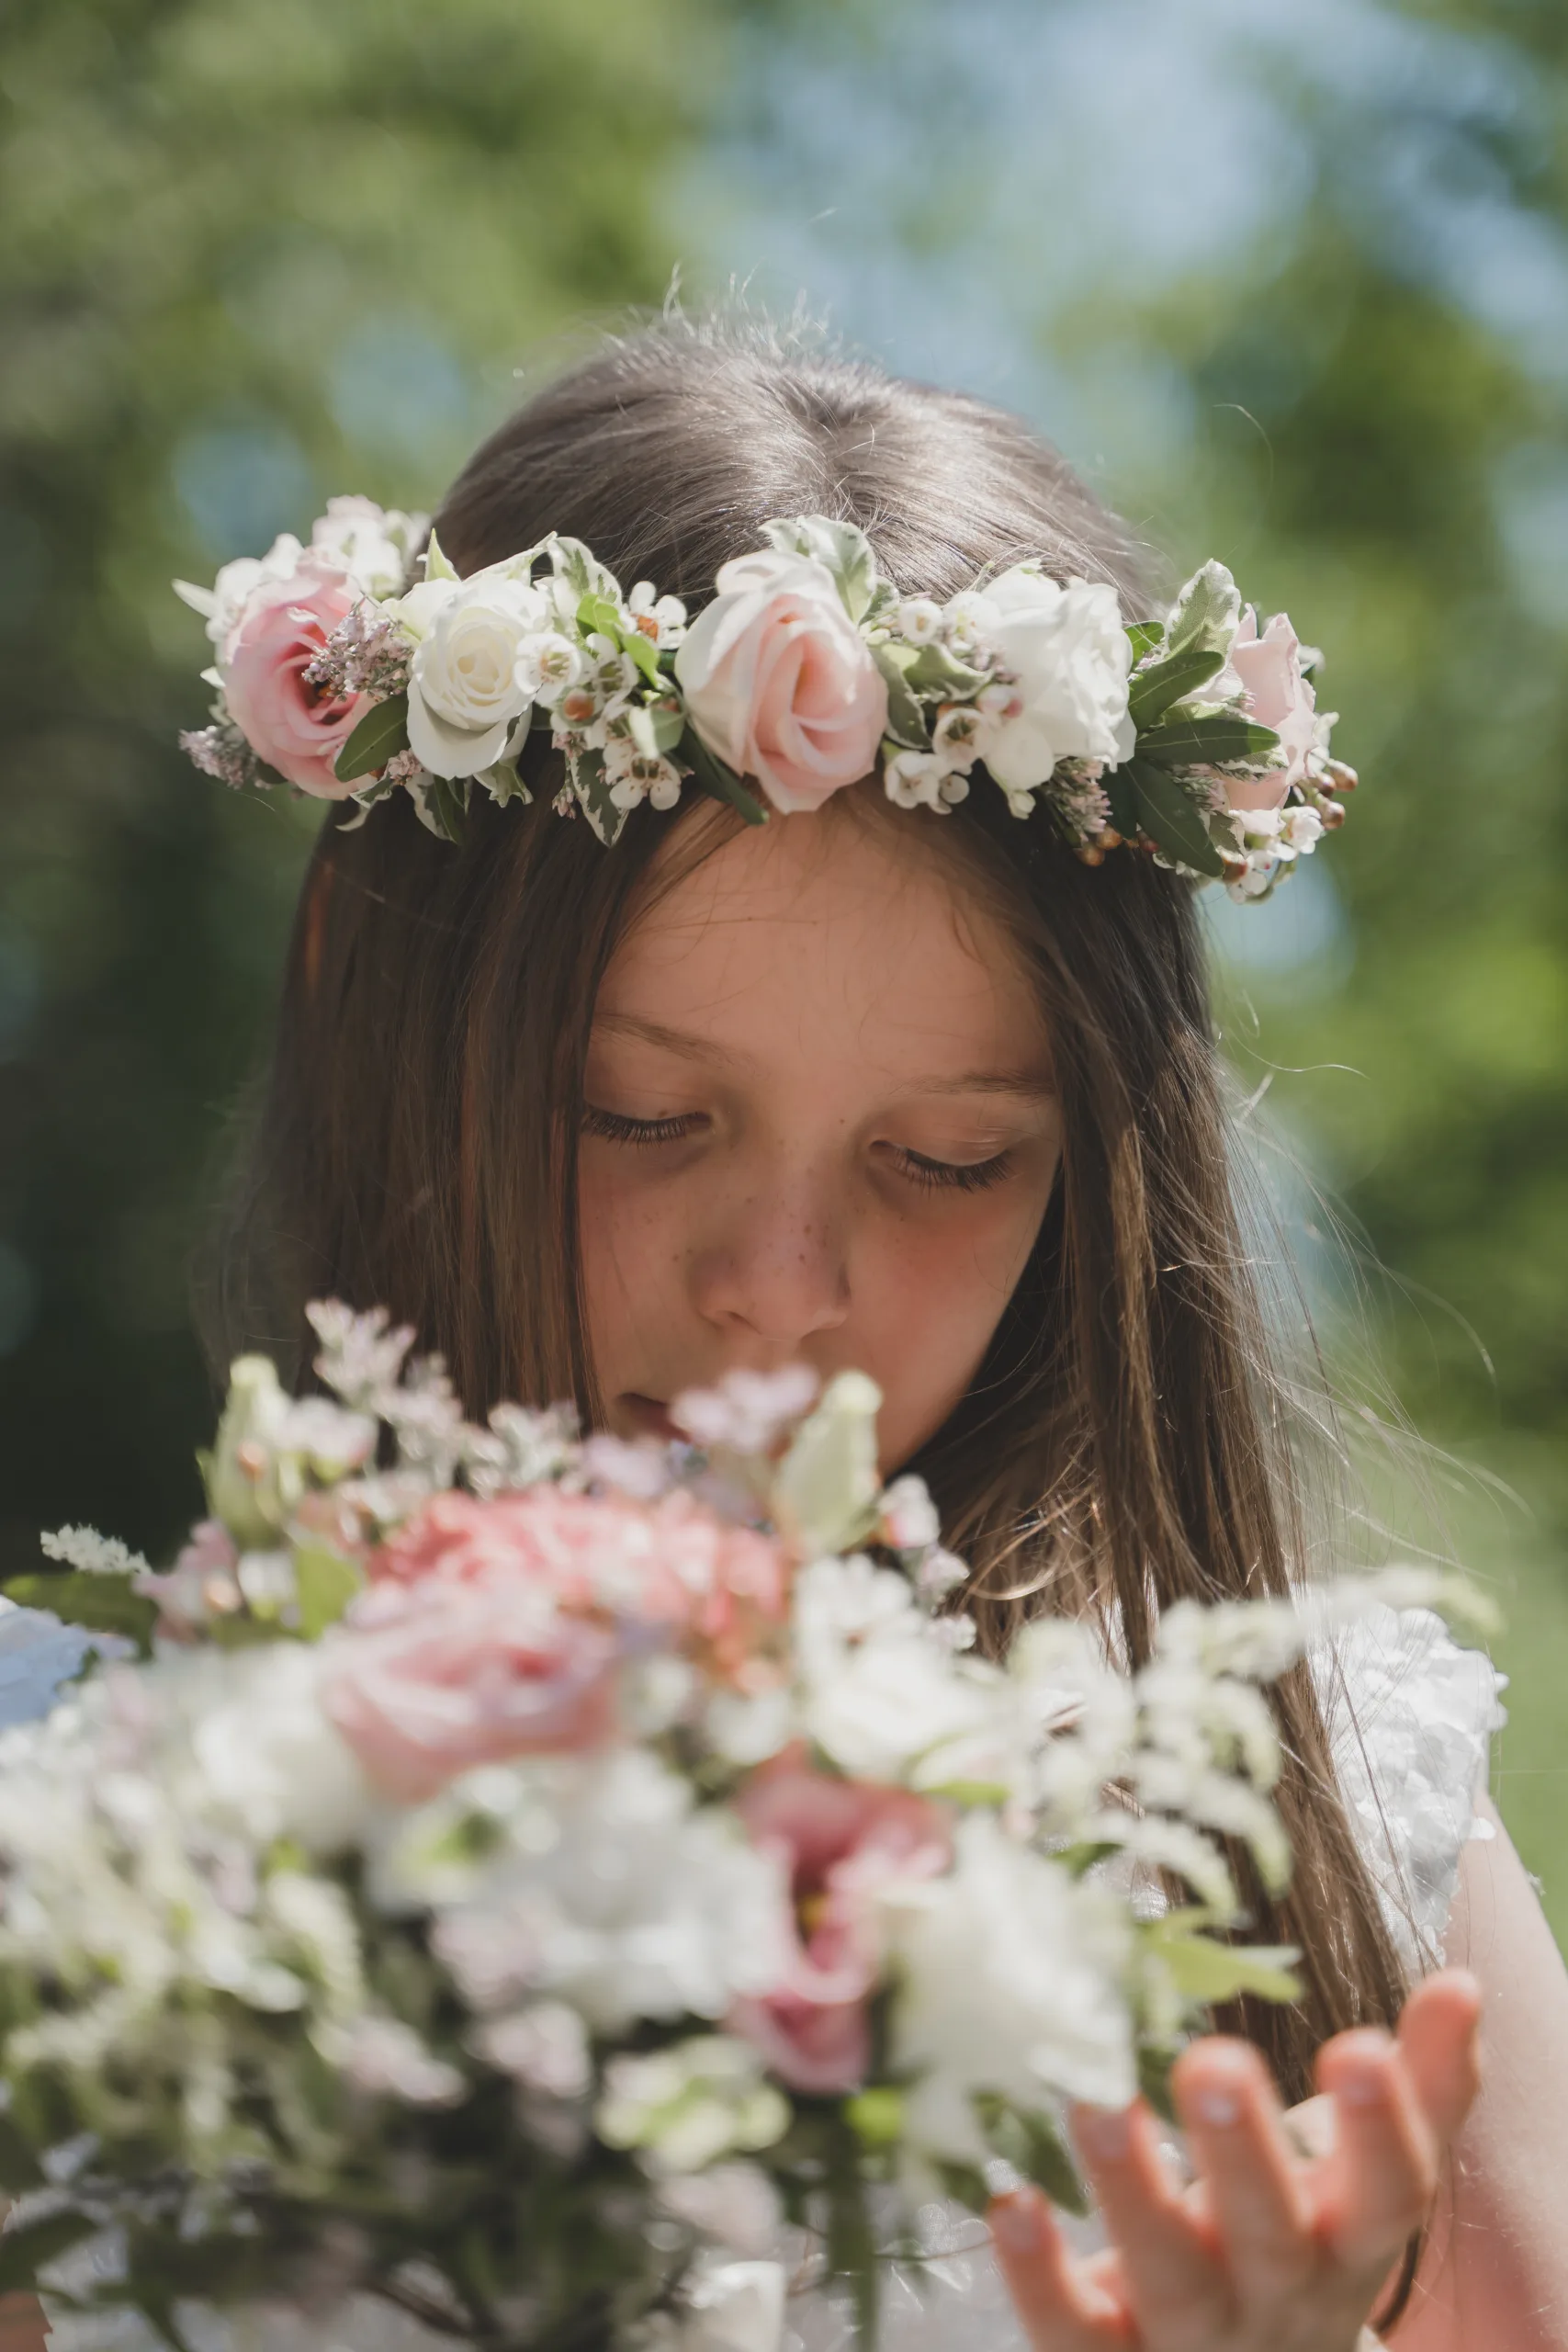 Orchardleigh Wedding Photographer: a girl with a flower crown on her head.